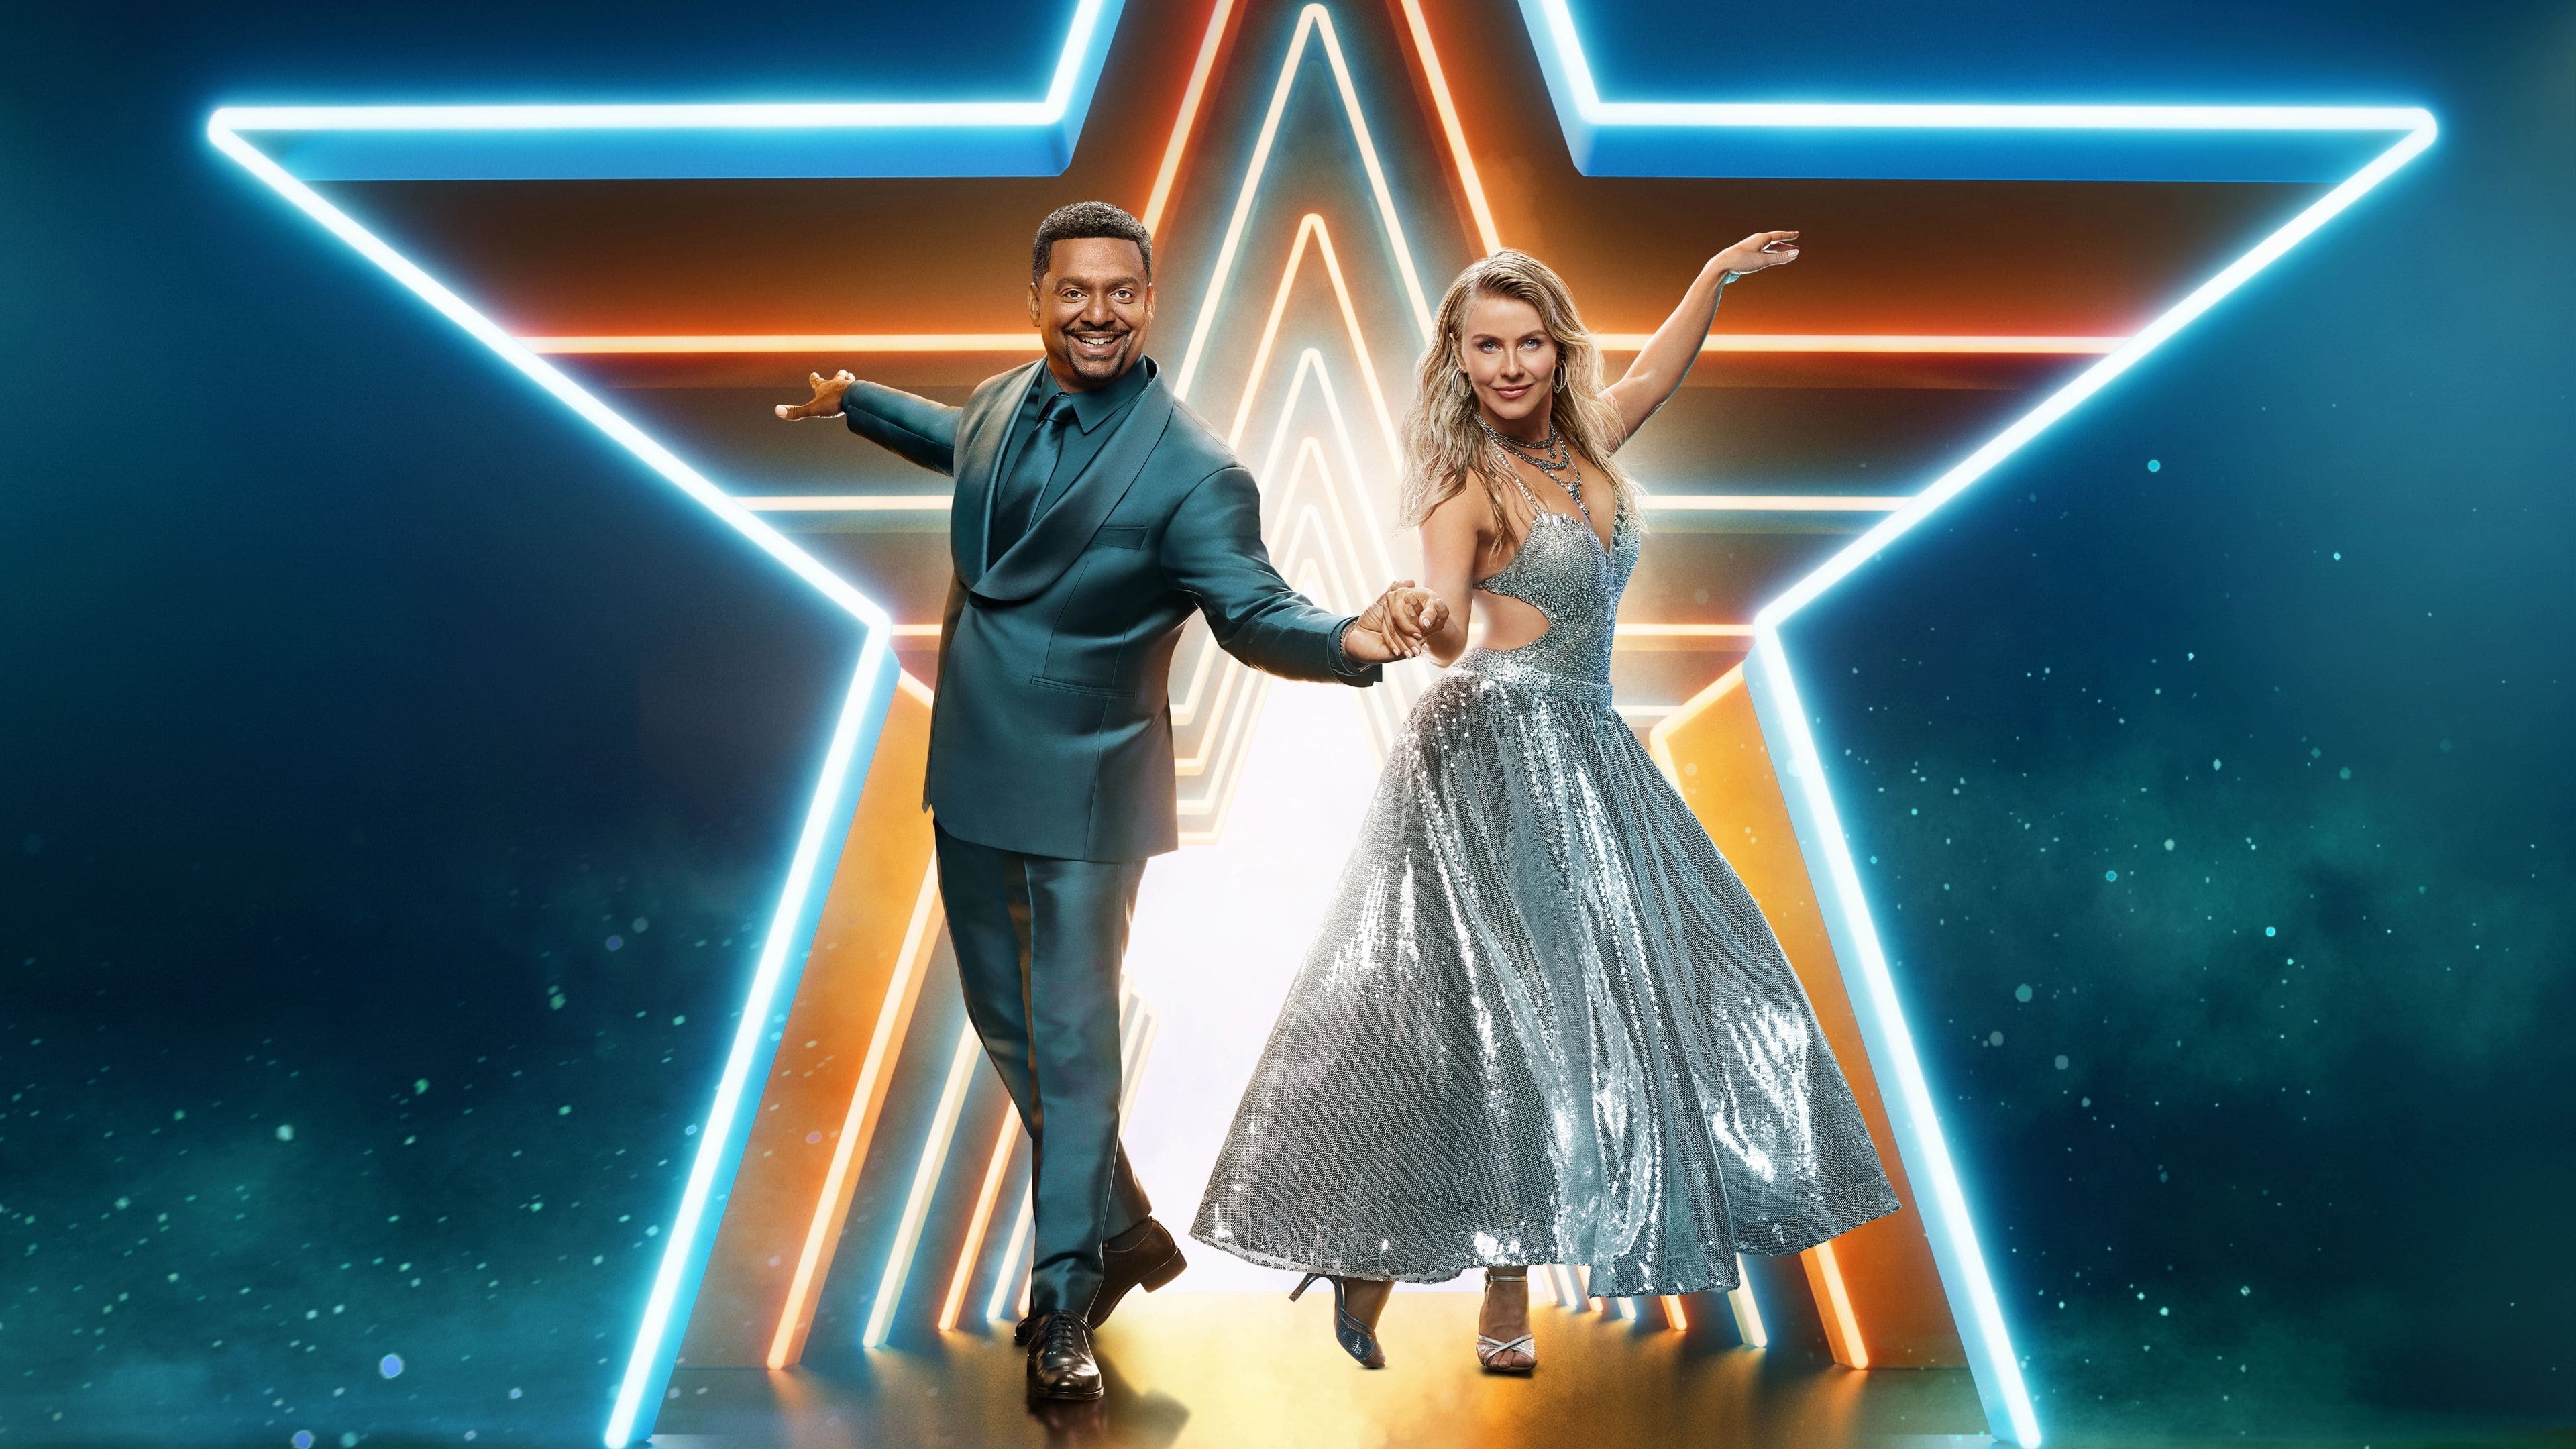 Dancing with the Stars Staffel 32 :Folge 7 